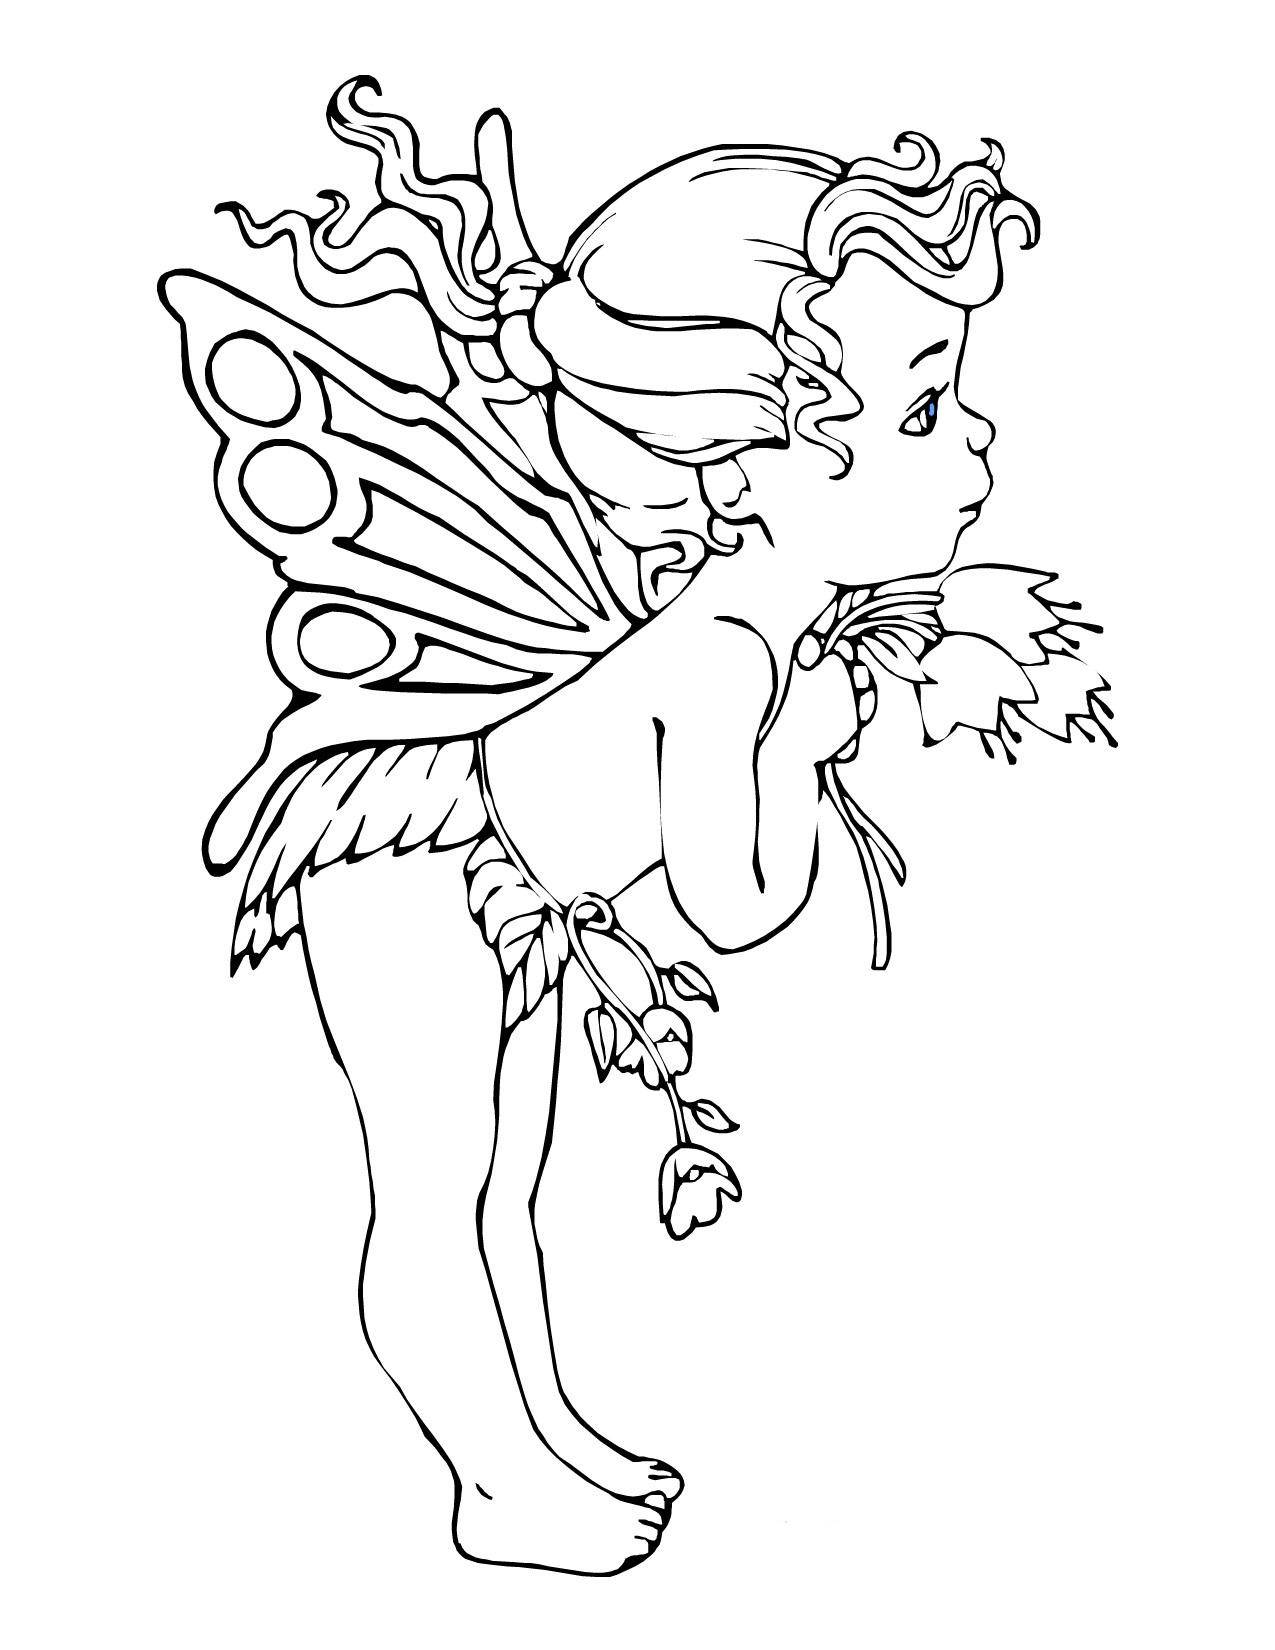 Coloring Girl with wings. Category Fantasy. Tags:  girl, wings, flowers.